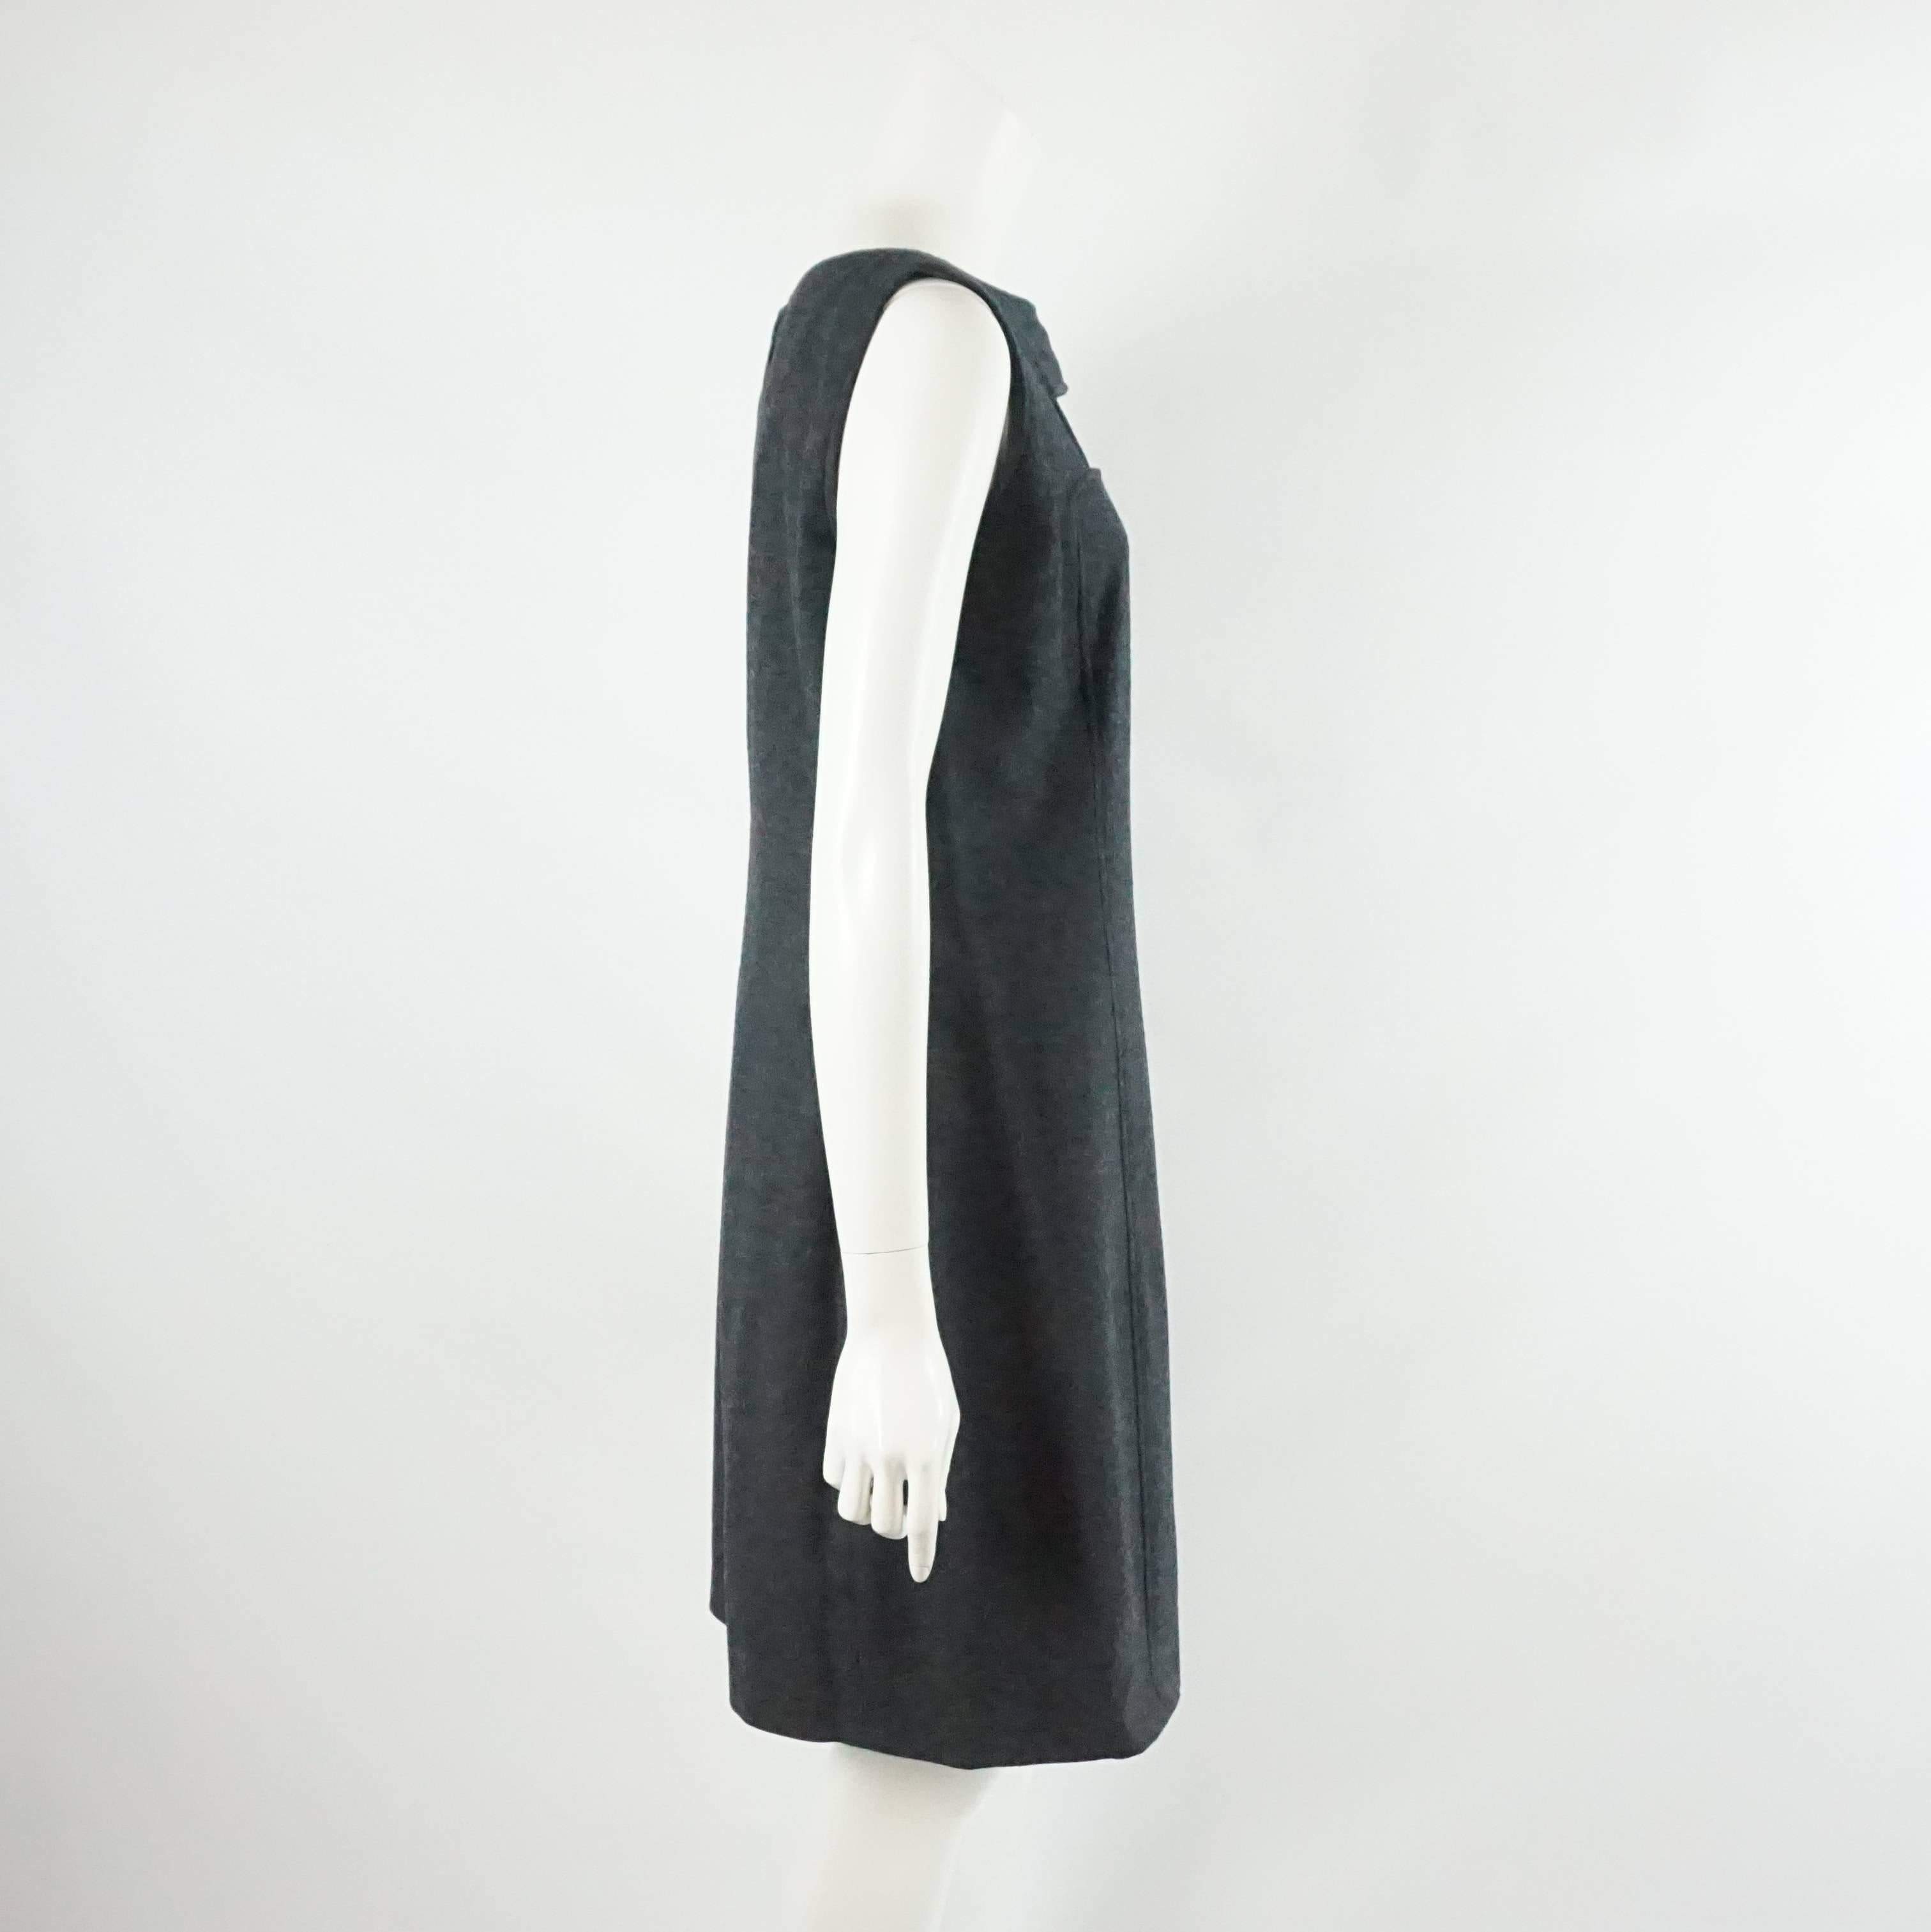 This Oscar de la Renta wool shift dress is a charcoal color. It is sleeveless and has a cutout in the front. This dress is in excellent condition.

Measurements
Bust: 39